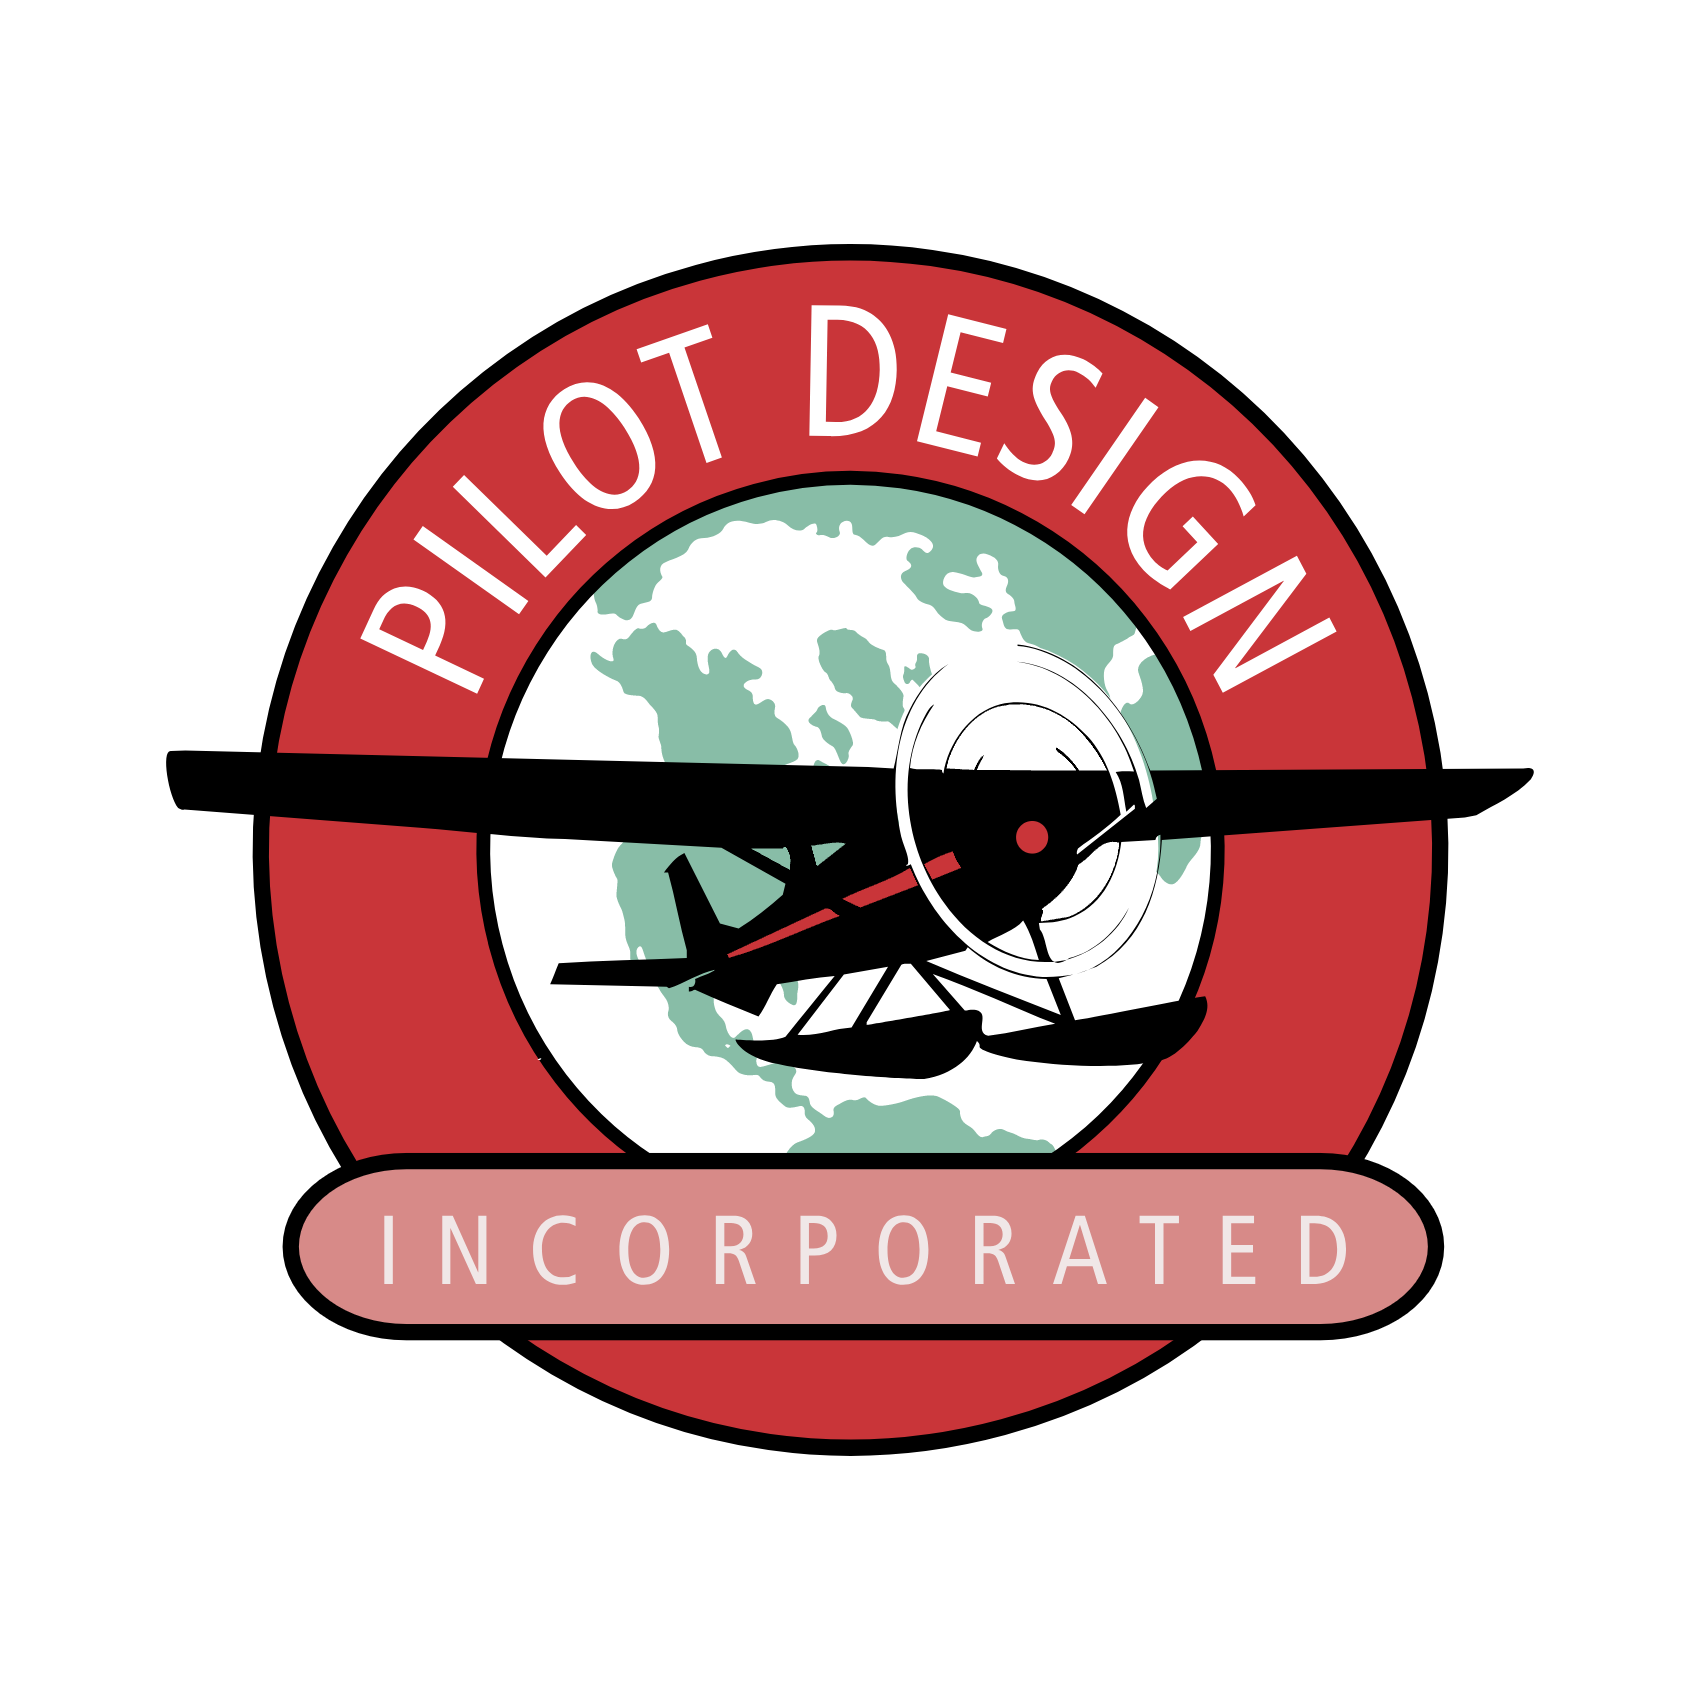 Download Pilot design incorporated Logo PNG and Vector (PDF, SVG, Ai ...